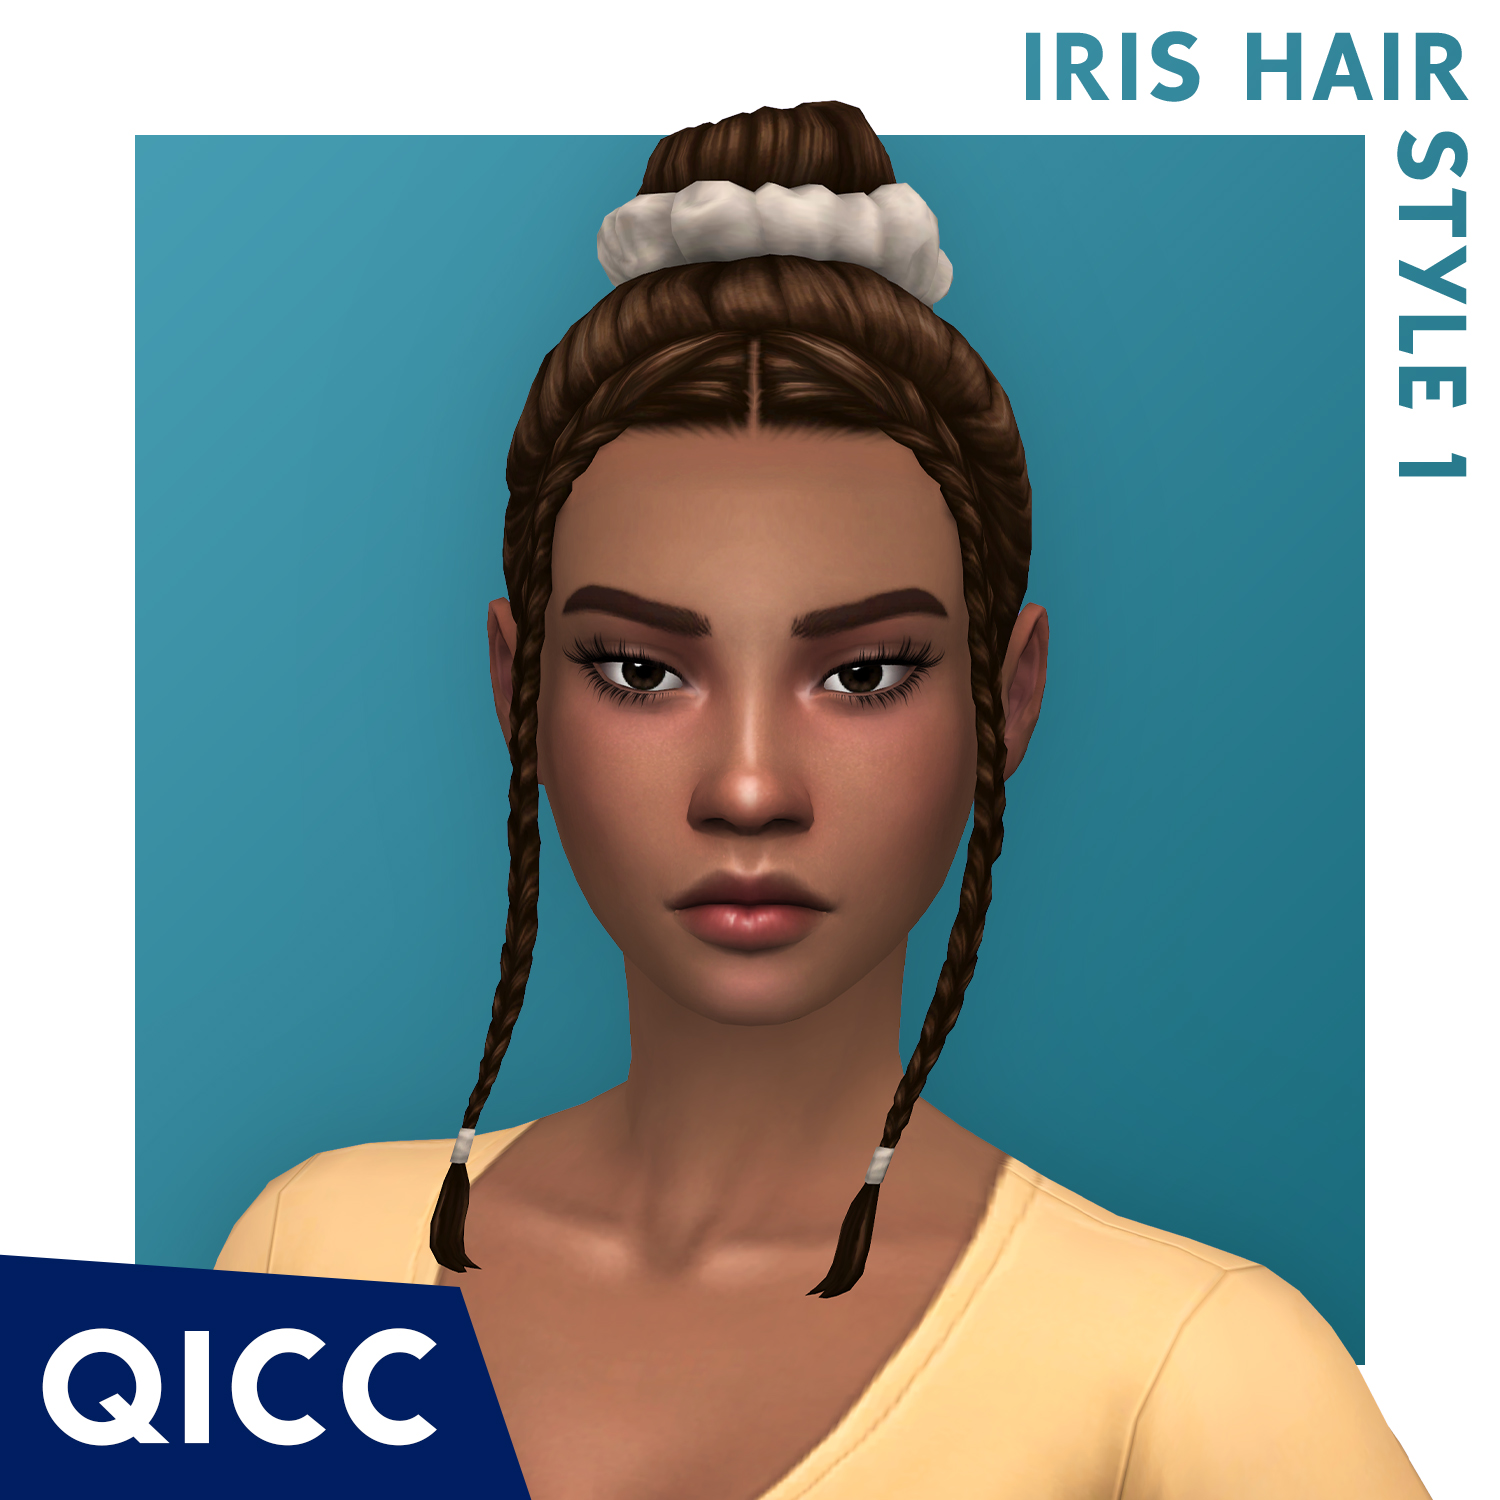 Download QICC - Iris Hair Style 1 - The Sims 4 Mods - CurseForge